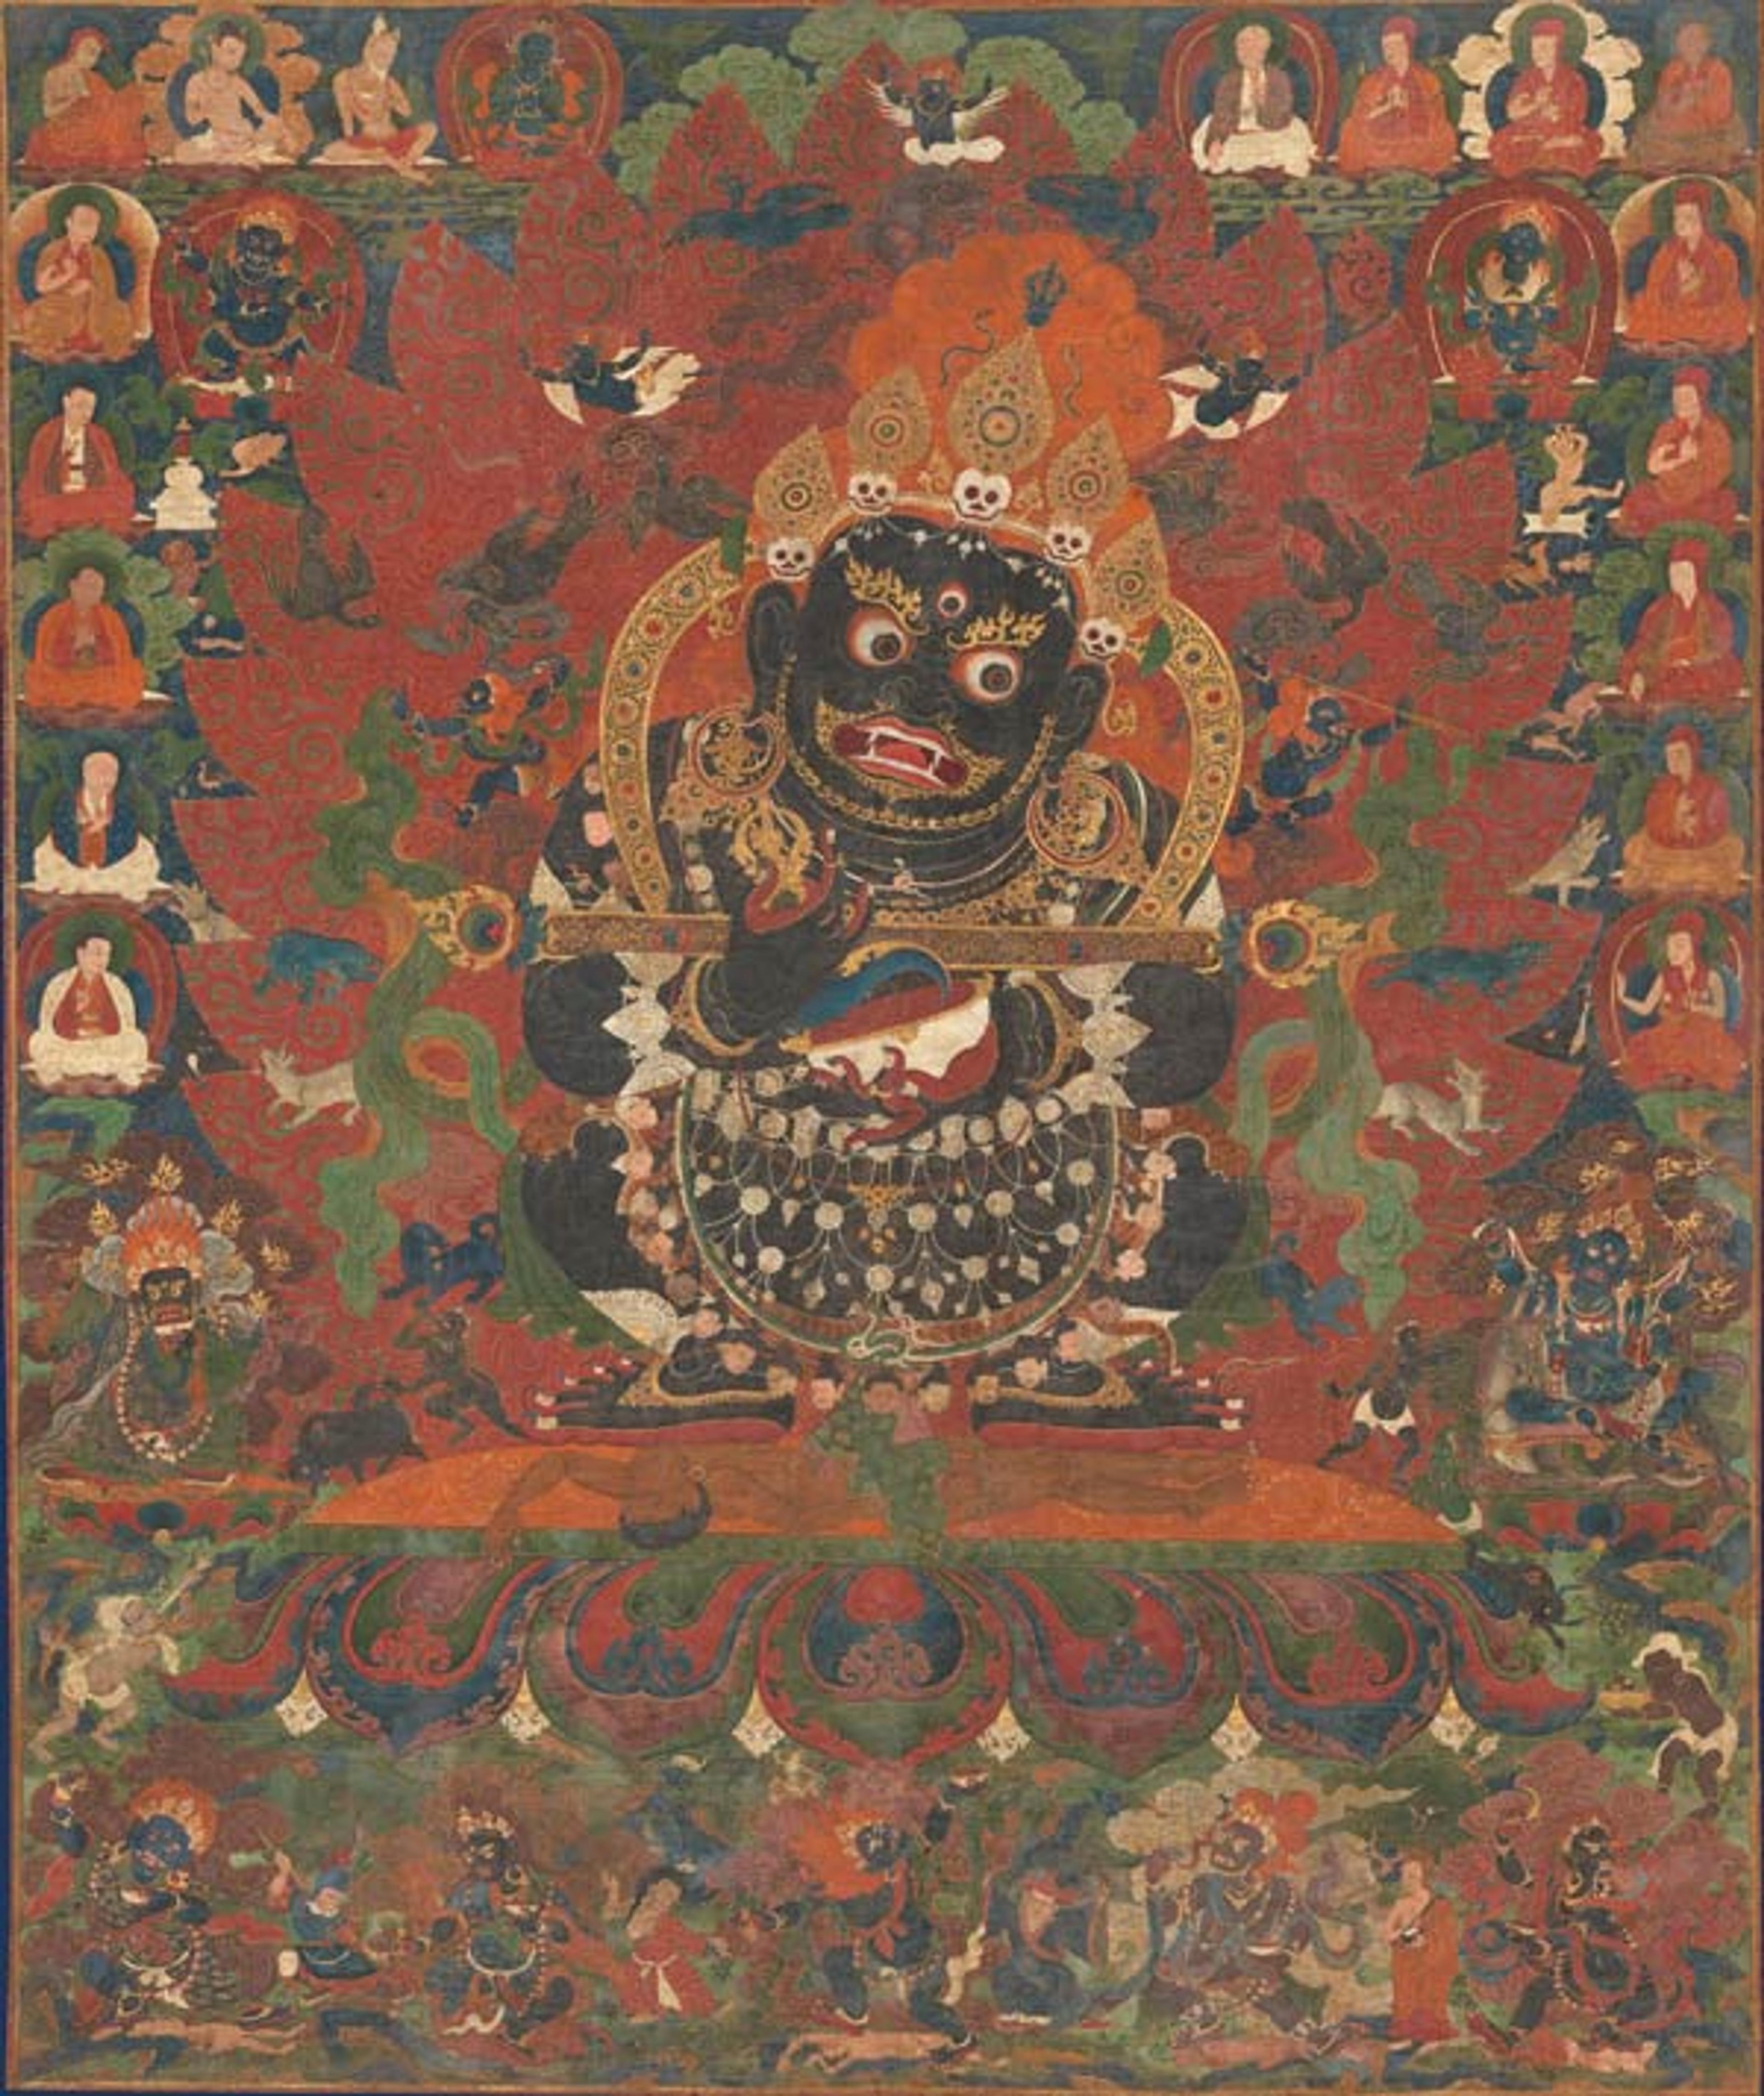 Mahakala, Protector of the Tent, ca. 1500. Central Tibet. Distemper on cloth; Image: 64 x 53 in. (162.6 x 134.6 cm). The Metropolitan Museum of Art, New York, Gift of Zimmerman Family Collection, 2012 (2012.444.4)